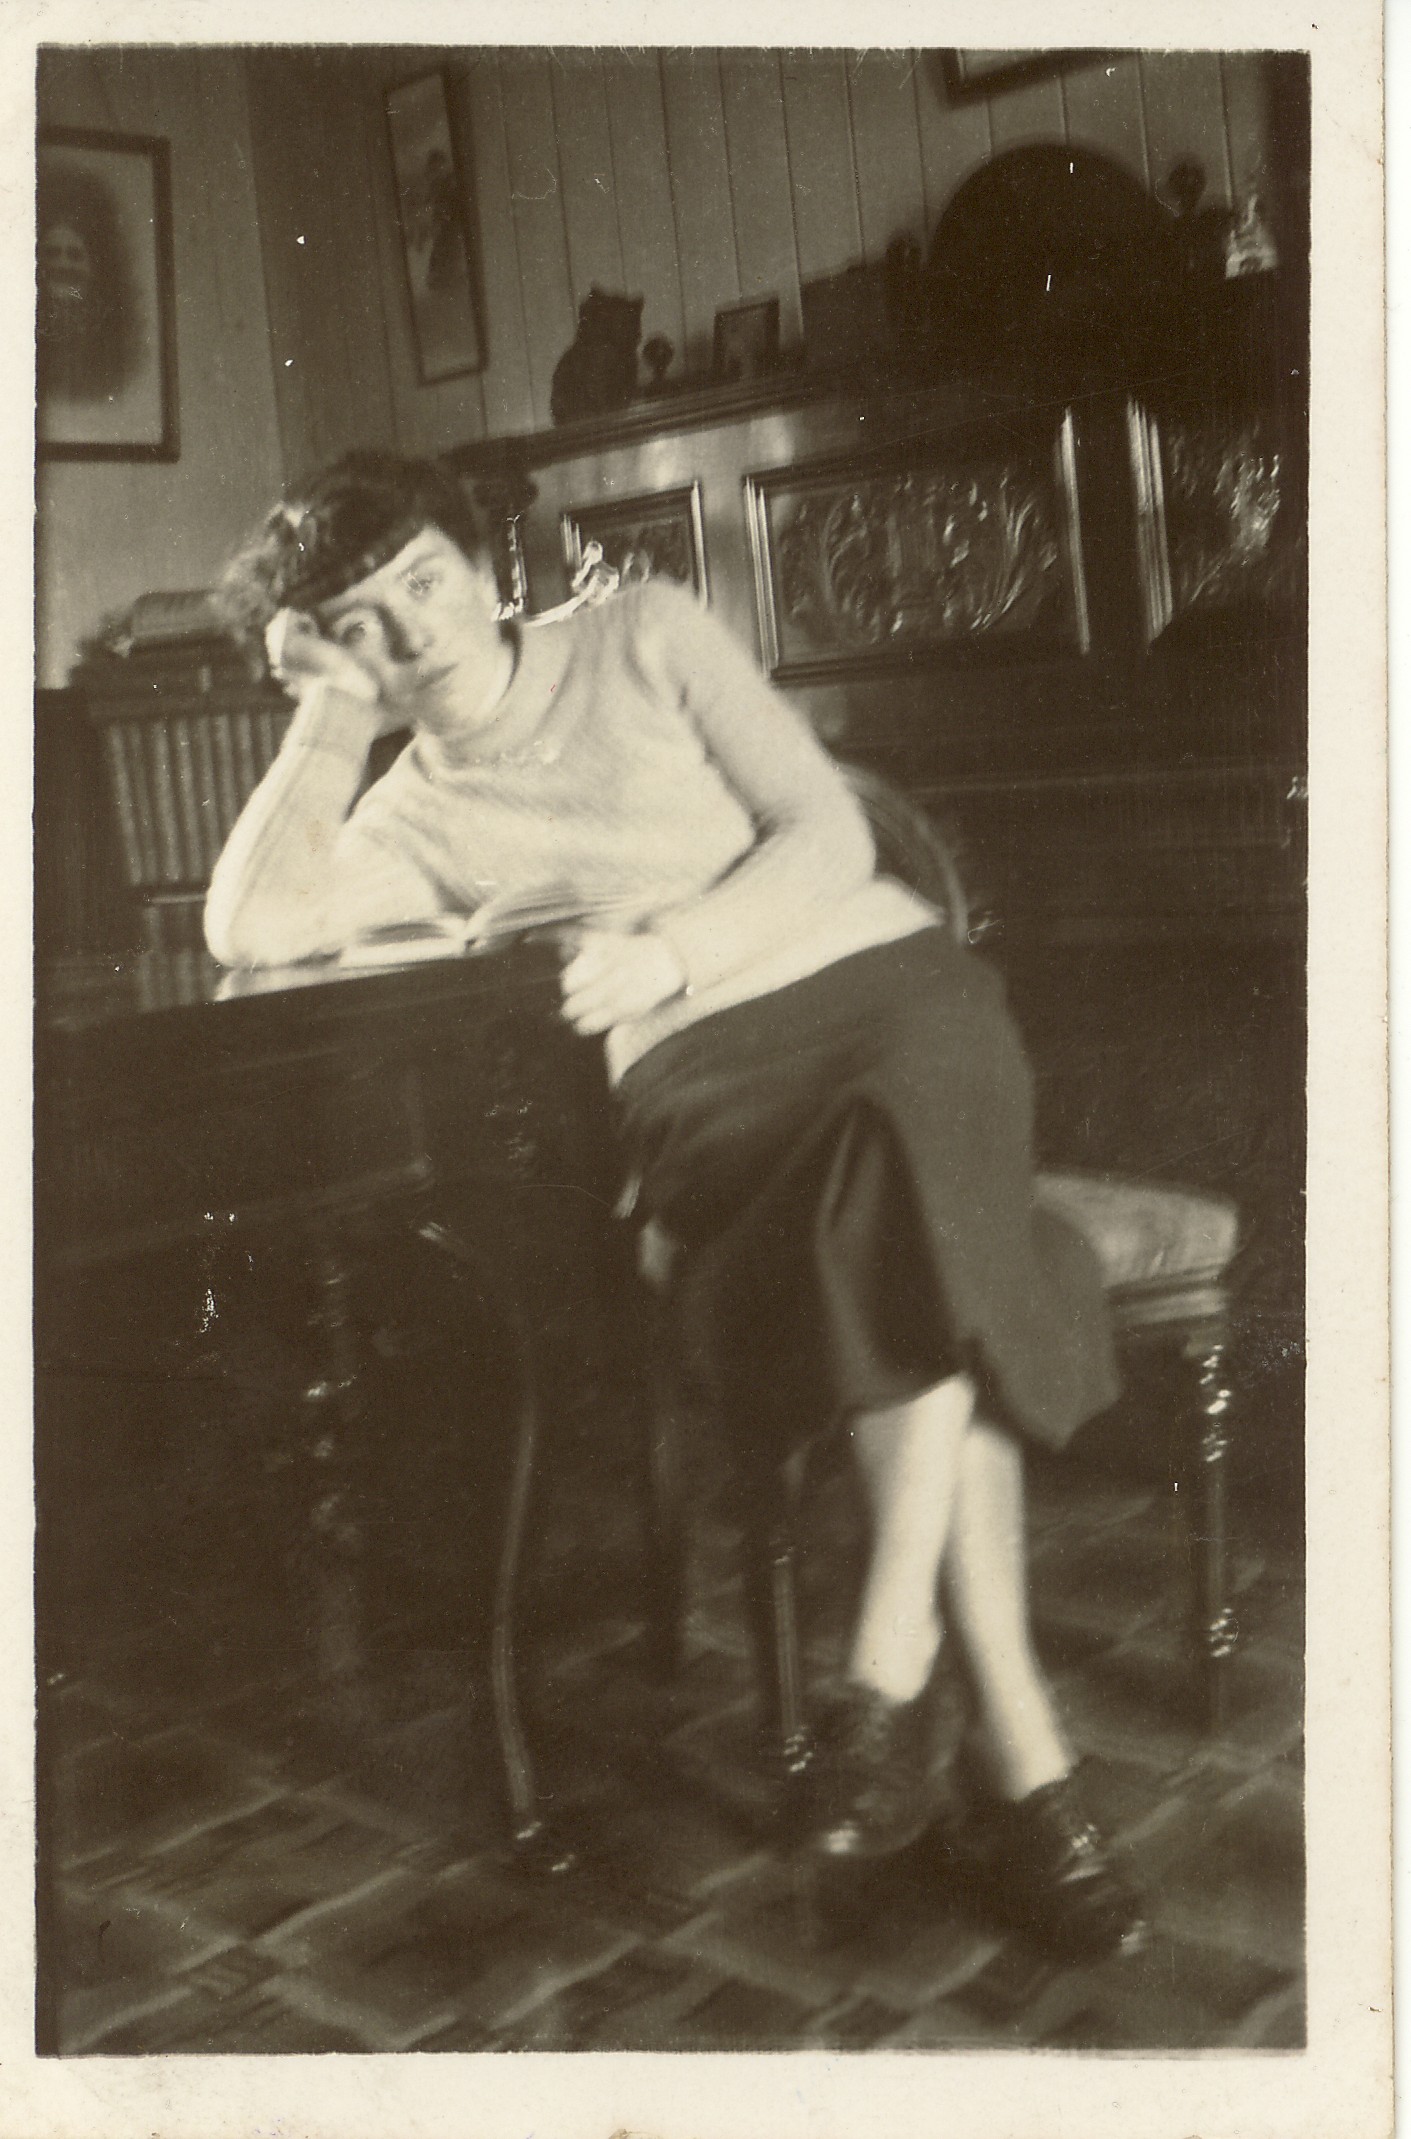 Eileen Sweeney, Polranny, photograph from the Sweeney family archive, courtesy of Charles Tyrell